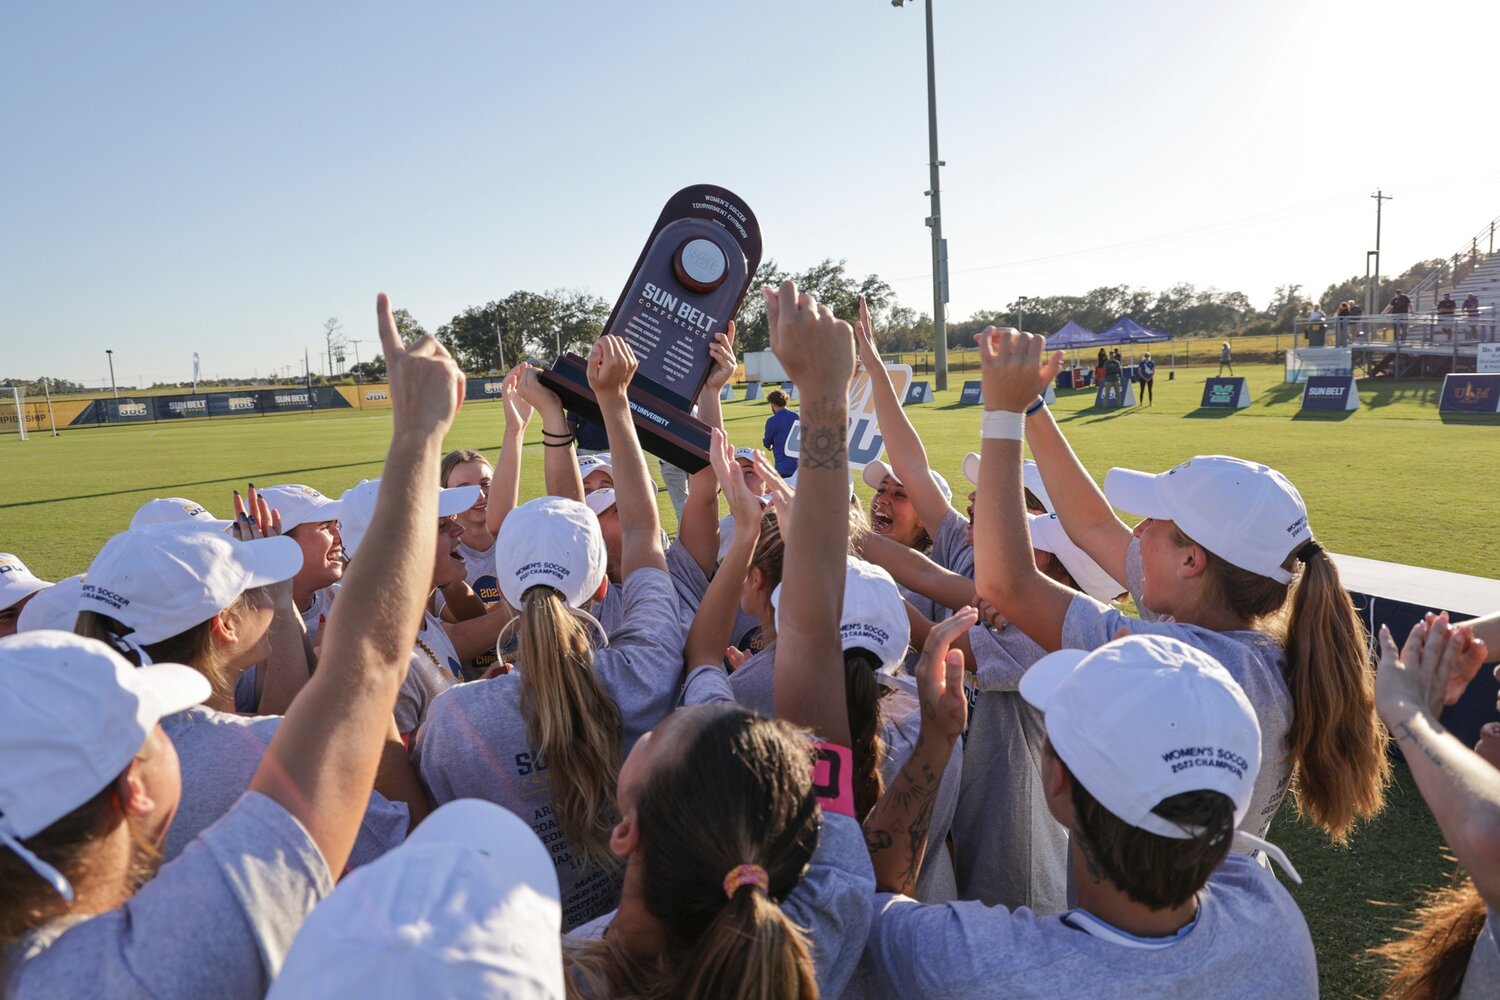 The Old Dominion Monarchs celebrate their second Sun Belt Conference Championship in as many seasons in the league at the Foley Sports Tourism Complex on Sunday, Nov. 5. Freshman Sydney Somers delivered the winning goal in overtime for a 2-1 win over the James Madison Dukes.